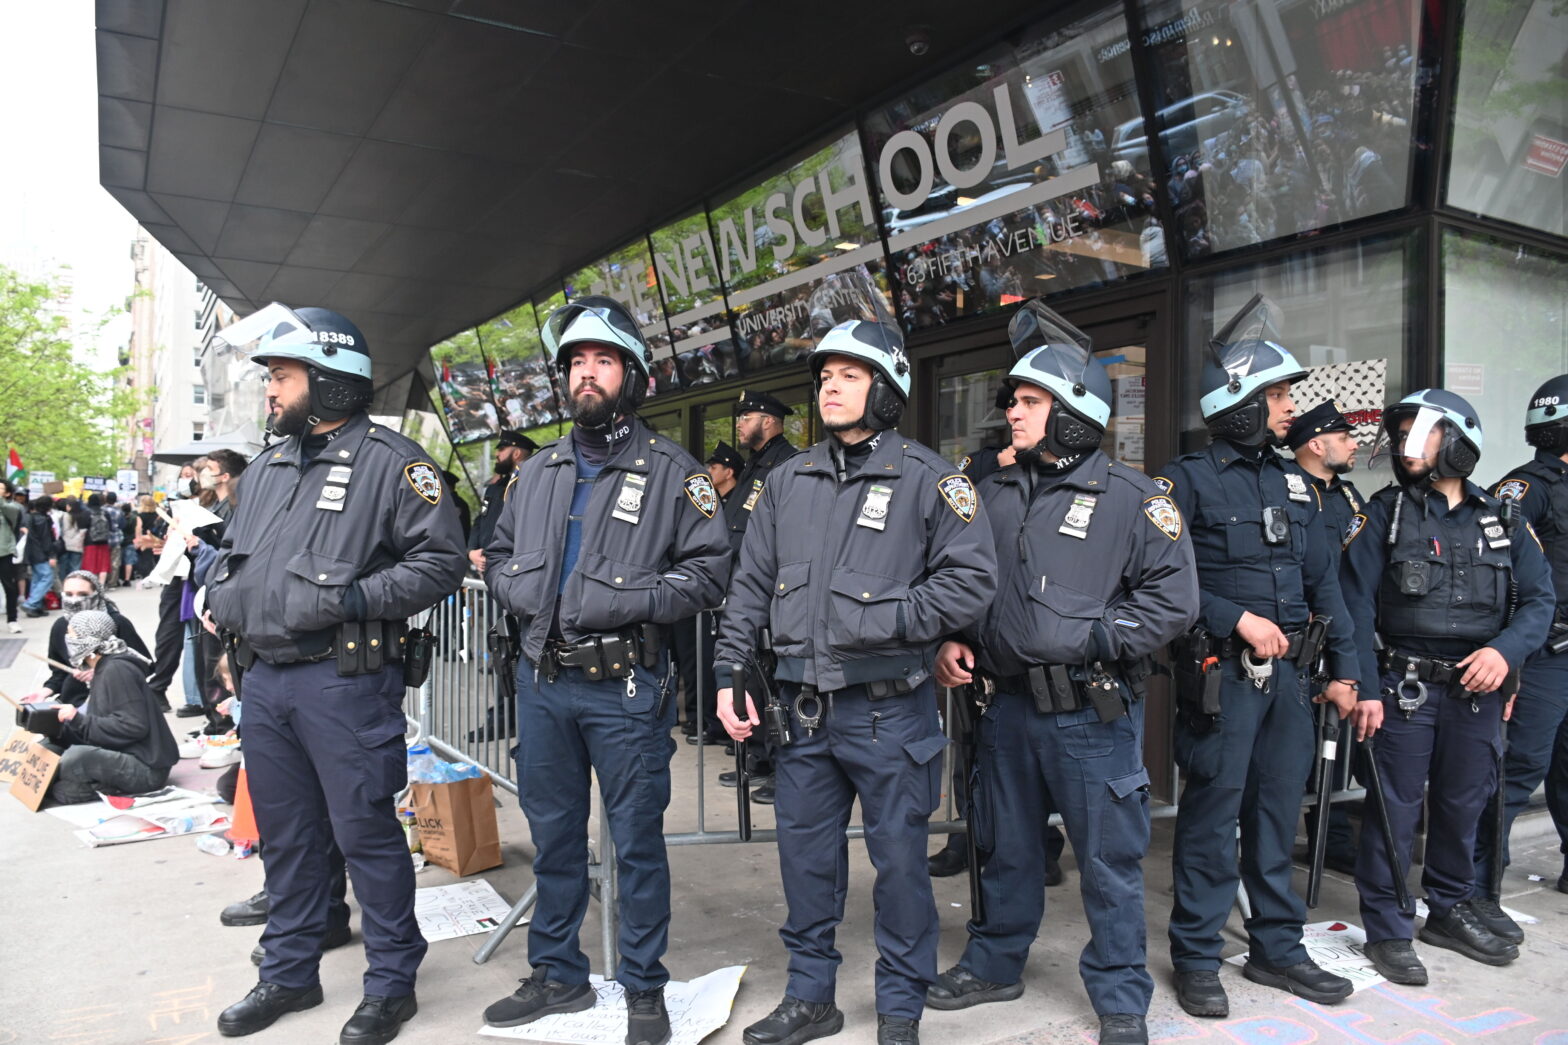 8 NYPD officers in riot gear standing outside barricades in front of the University Center. Few more officers are visible in the background, and on the right of the image, demonstrators are visible with signs.